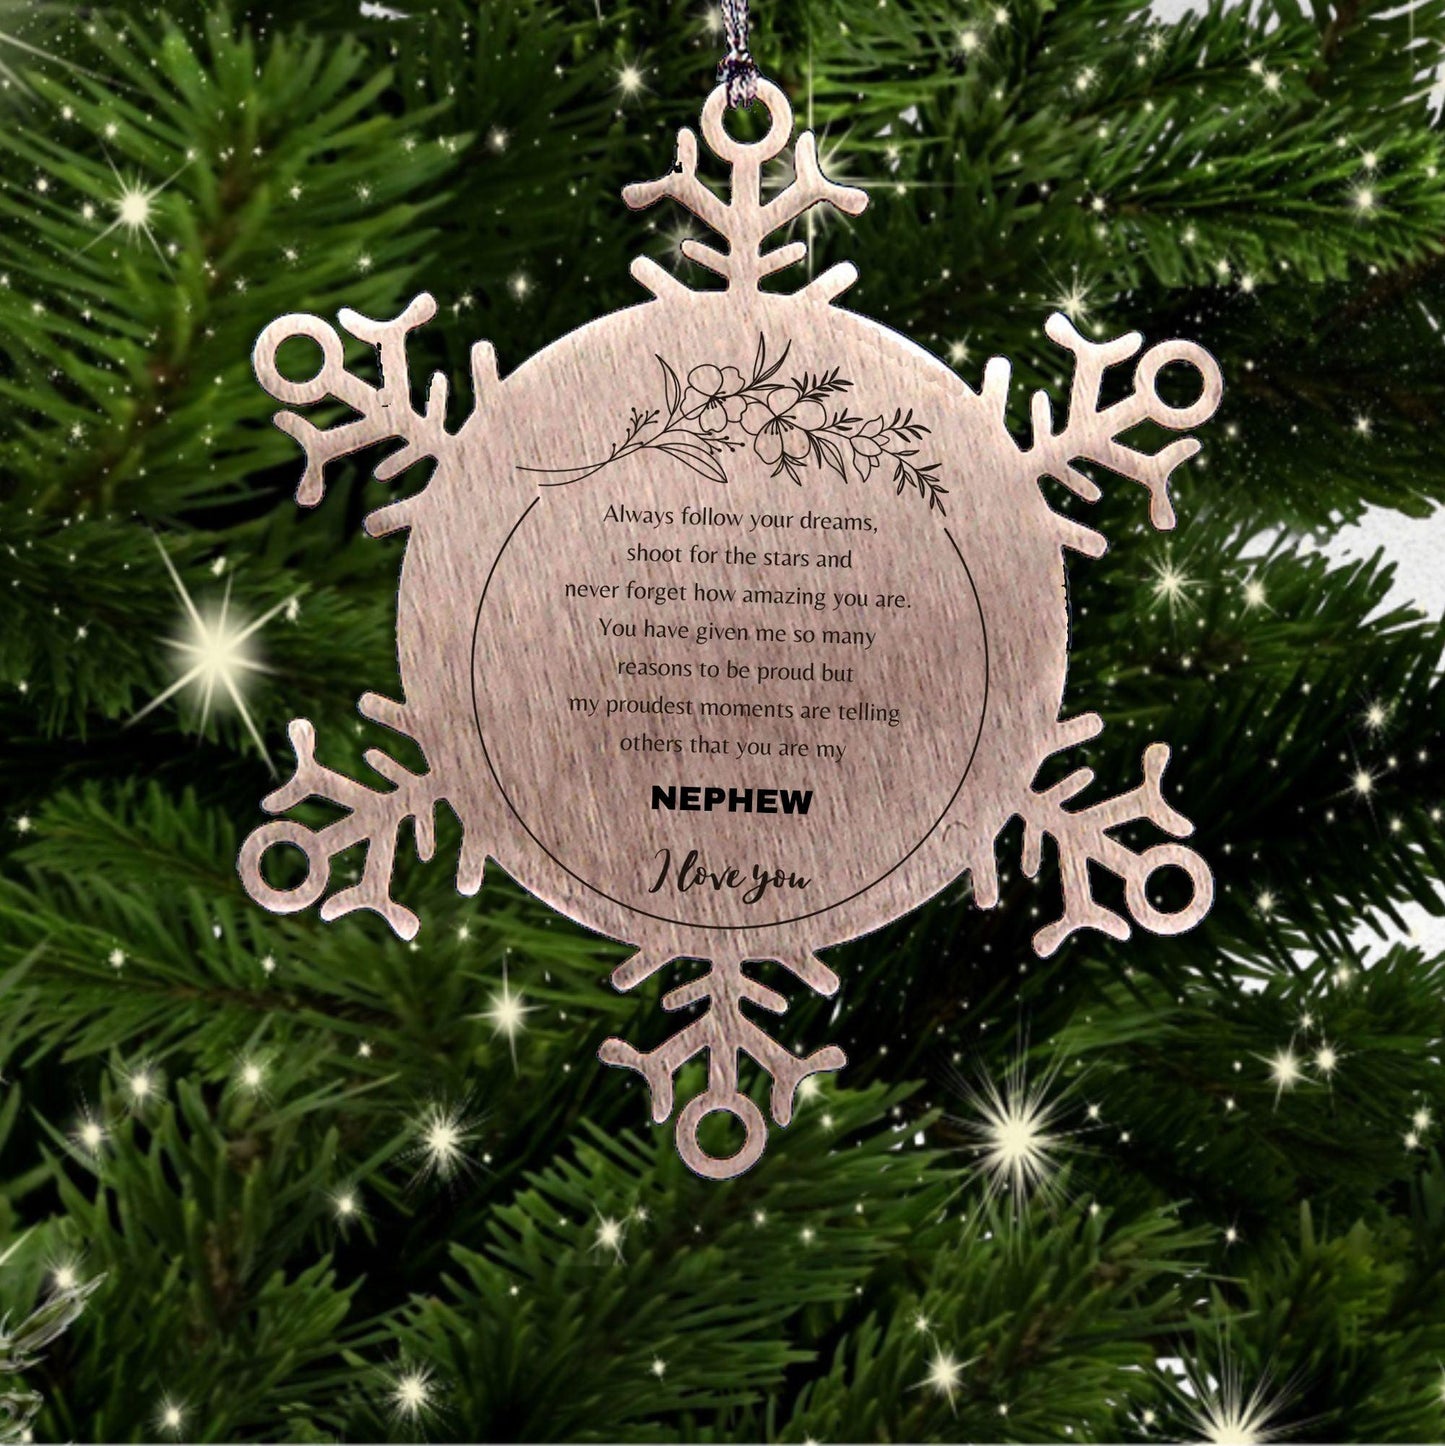 Inspirational Nephew Snowflake Ornament - Behind you, all your Memories, Before you, all your Dreams - Birthday, Christmas Holiday Gifts - Mallard Moon Gift Shop